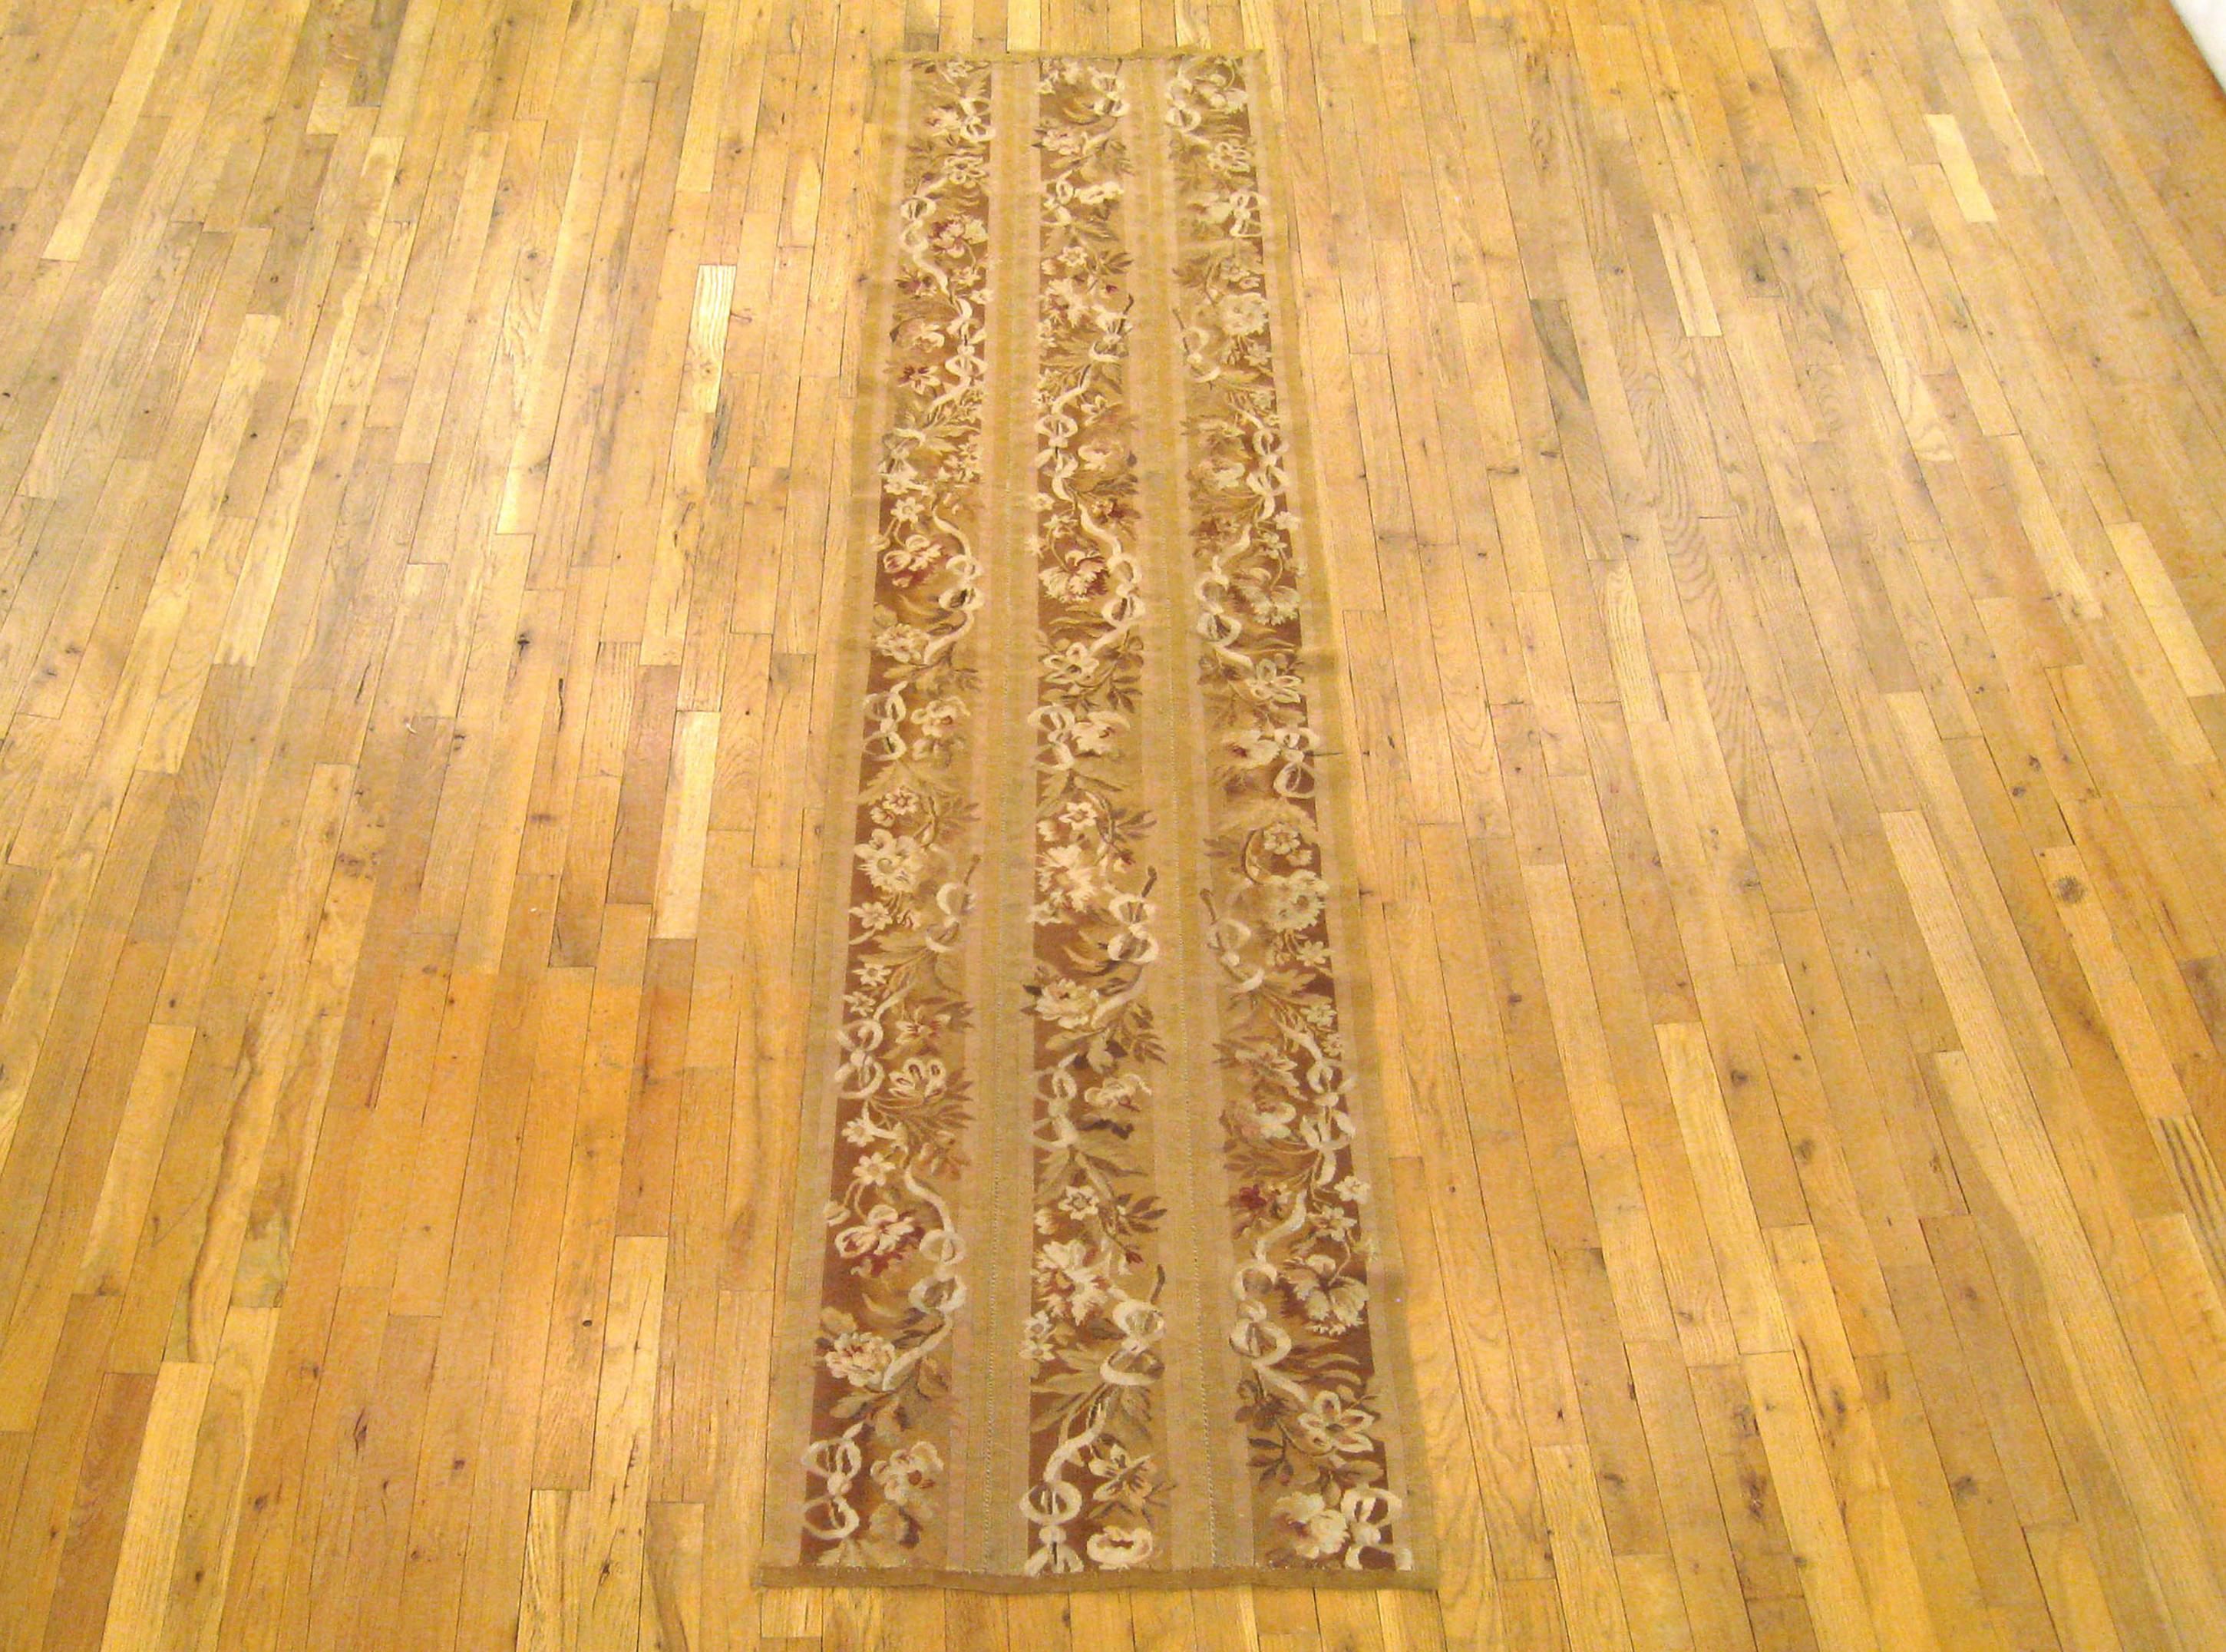 Antique French Aubusson Rug, Runner size, circa 1920

A one-of-a-kind antique French Aubusson Carpet, hand-knotted with soft wool pile. This lovely hand-knotted wool rug features floral elements allover the light brown primary field, with a delicate